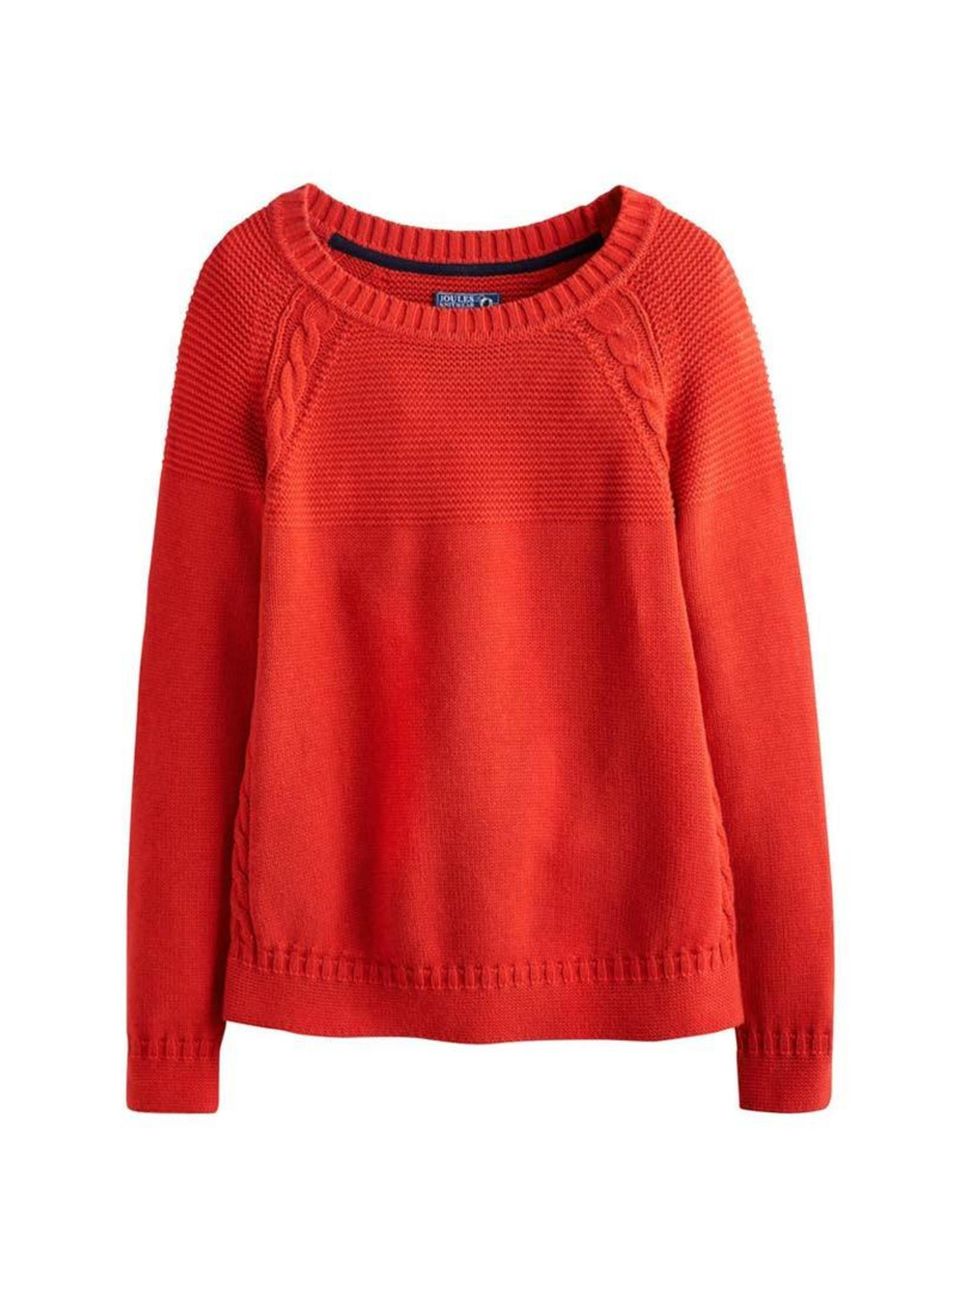 Tomato red and blue denim are a colour-match made in heaven for Picture Assistant Lucy Johnston.

Joules jumper, £69.95